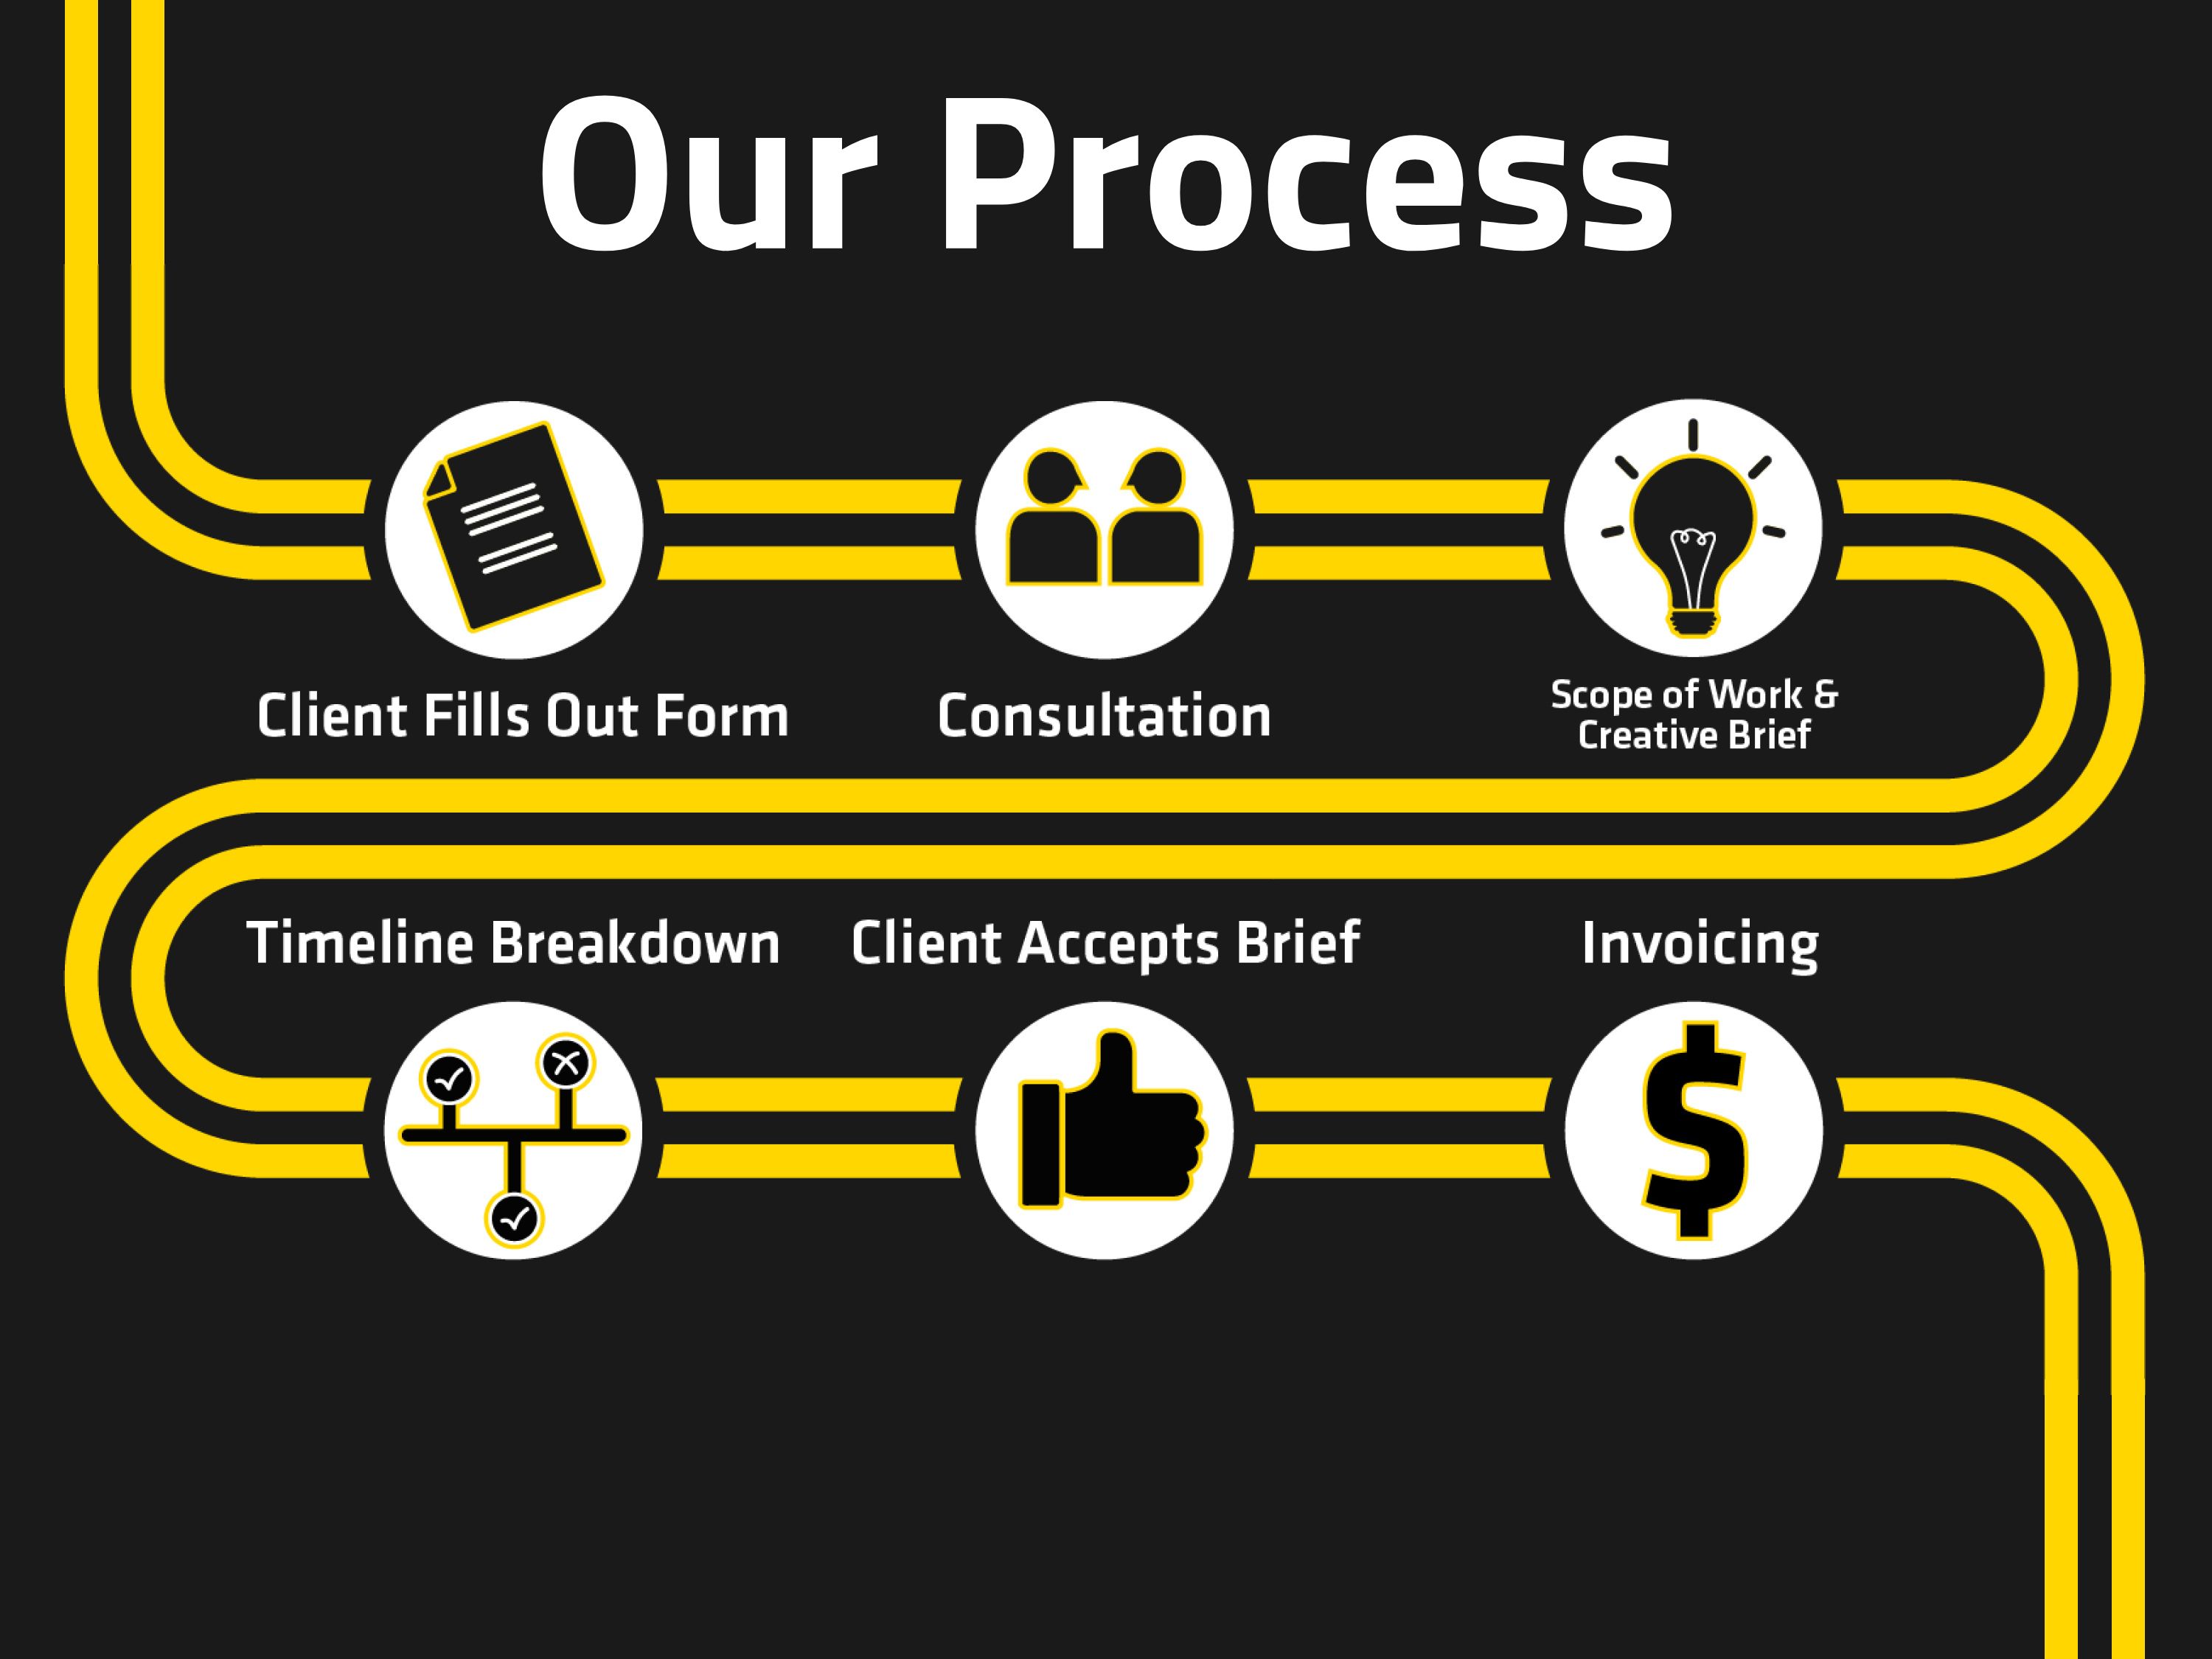 Our Process: Client fills out form, Consultation, Scope of work and creative brief, Timeline breakdown, Client accepts brief, Invoicing